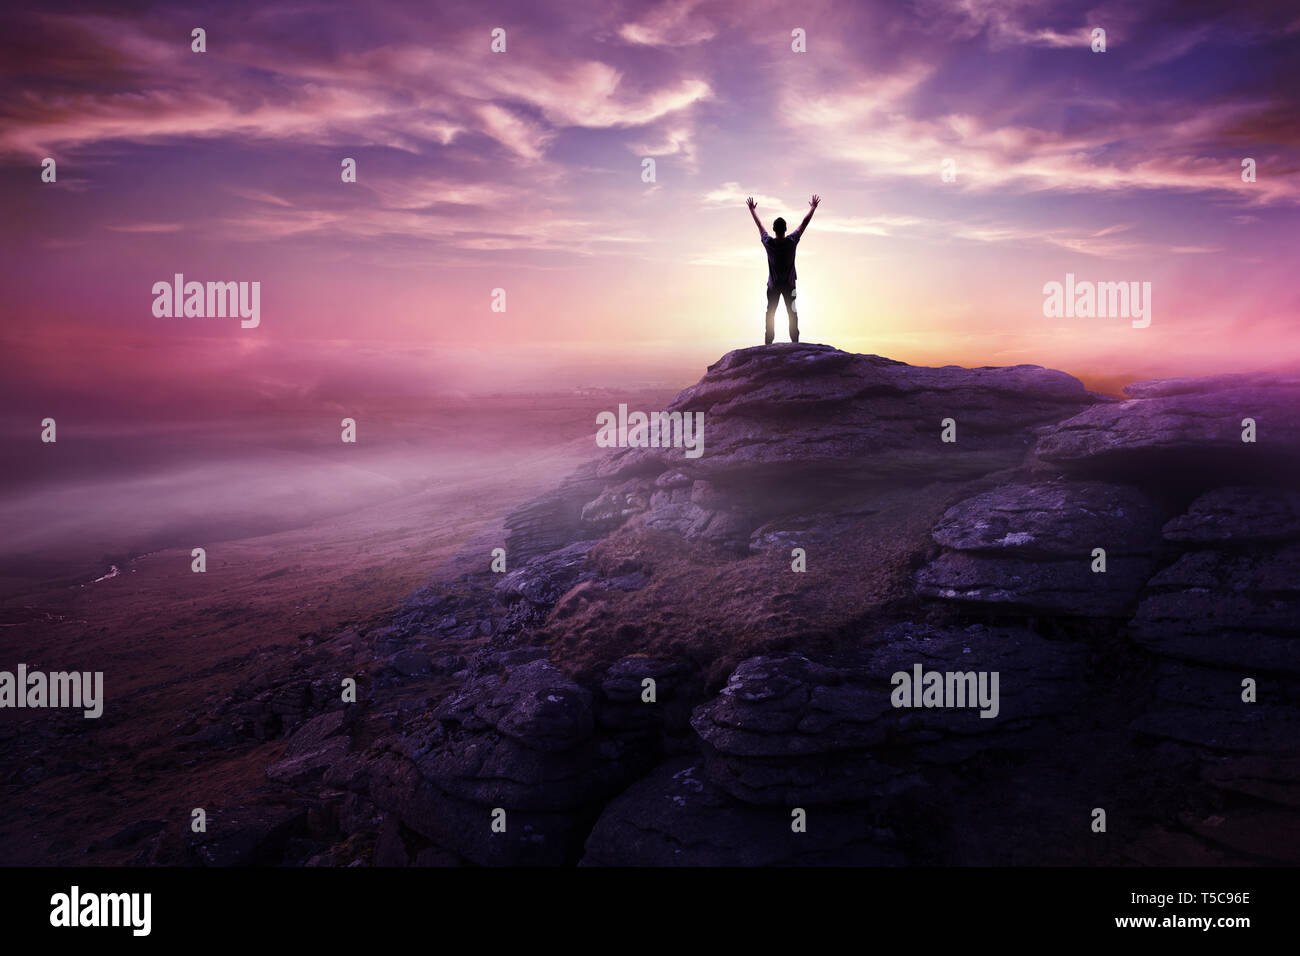 A man expressing freedom by reaching up to the sky as the sun sets in the distance. Hopes and dreams photo composite. Stock Photo